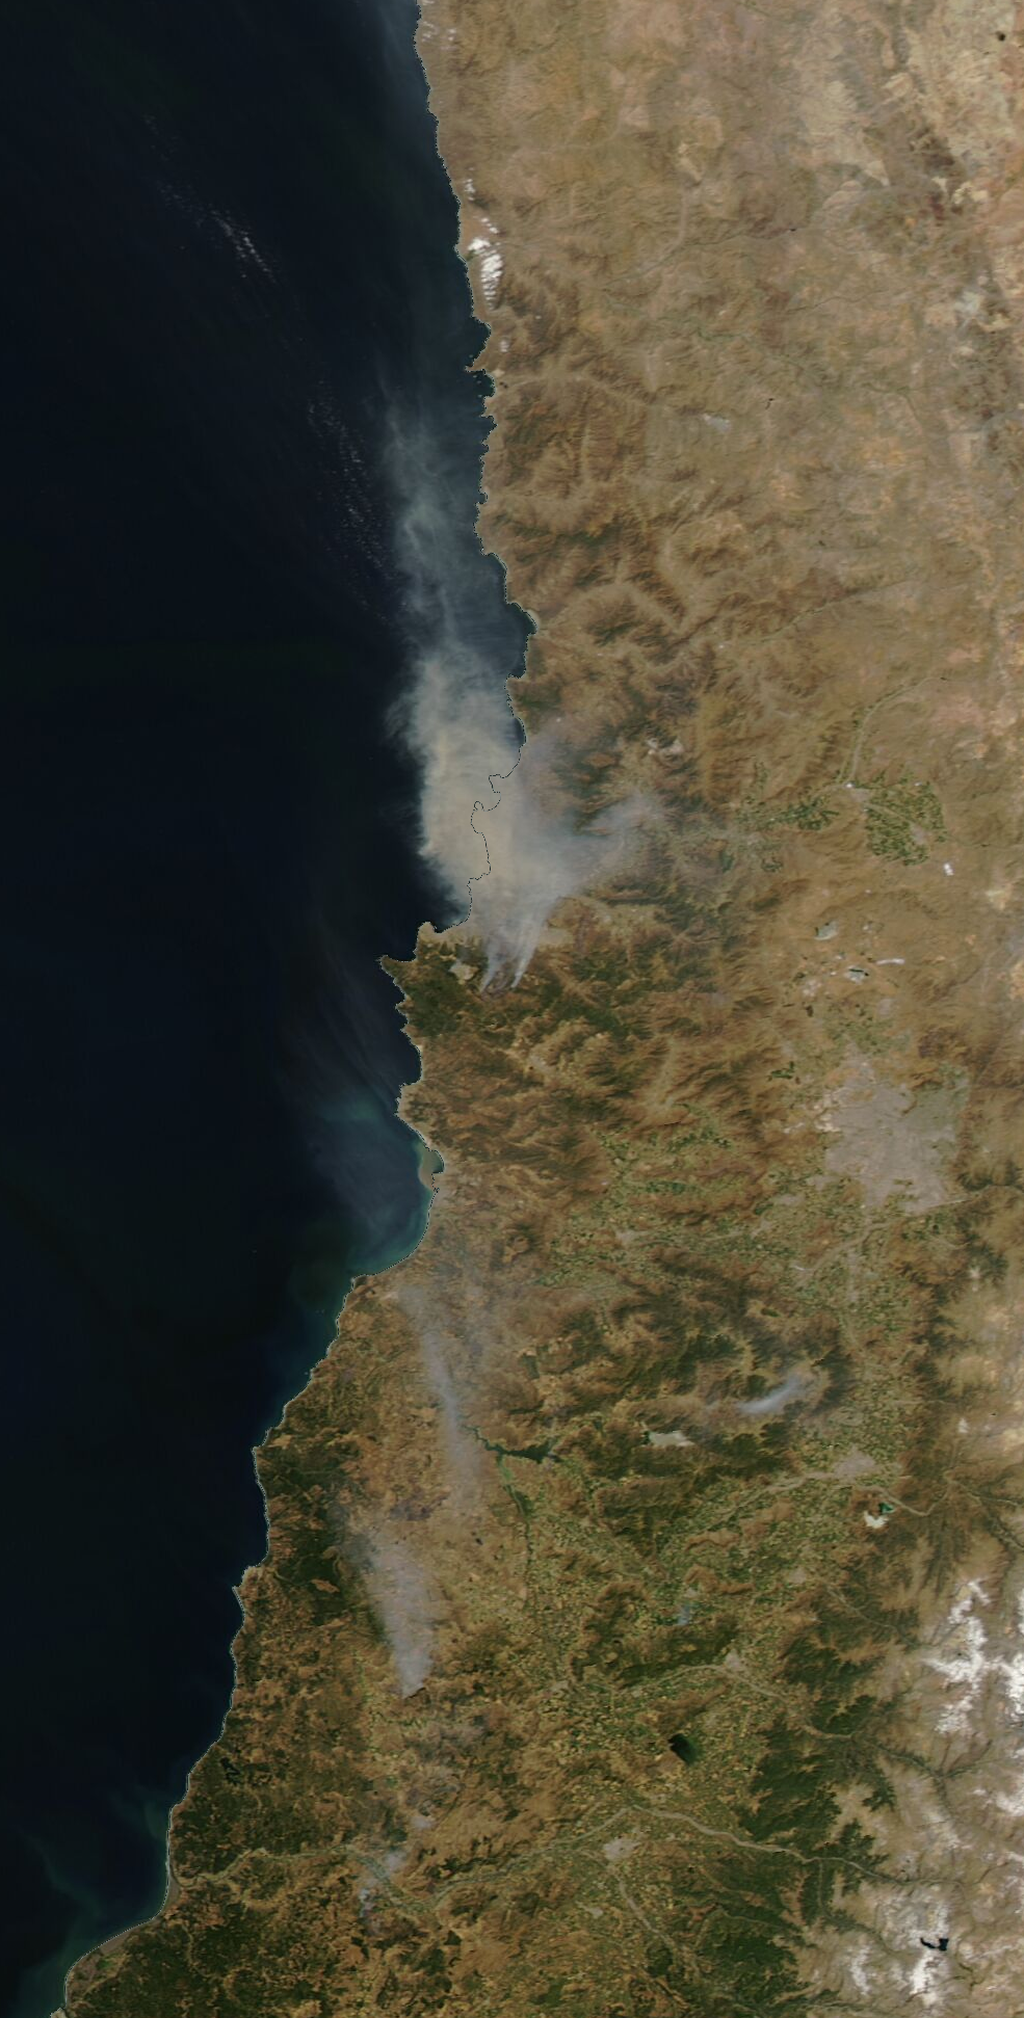 Near-record heat and prolonged drought set the stage for devastating wildfires in Chile last week. According to news reports, the blazes caused at least 123 deaths with over 300 people missing, making these fires among the world’s deadliest since 1900. NASA’s Aqua satellite captured this image of smoke plumes on Feb. 3, 2024.